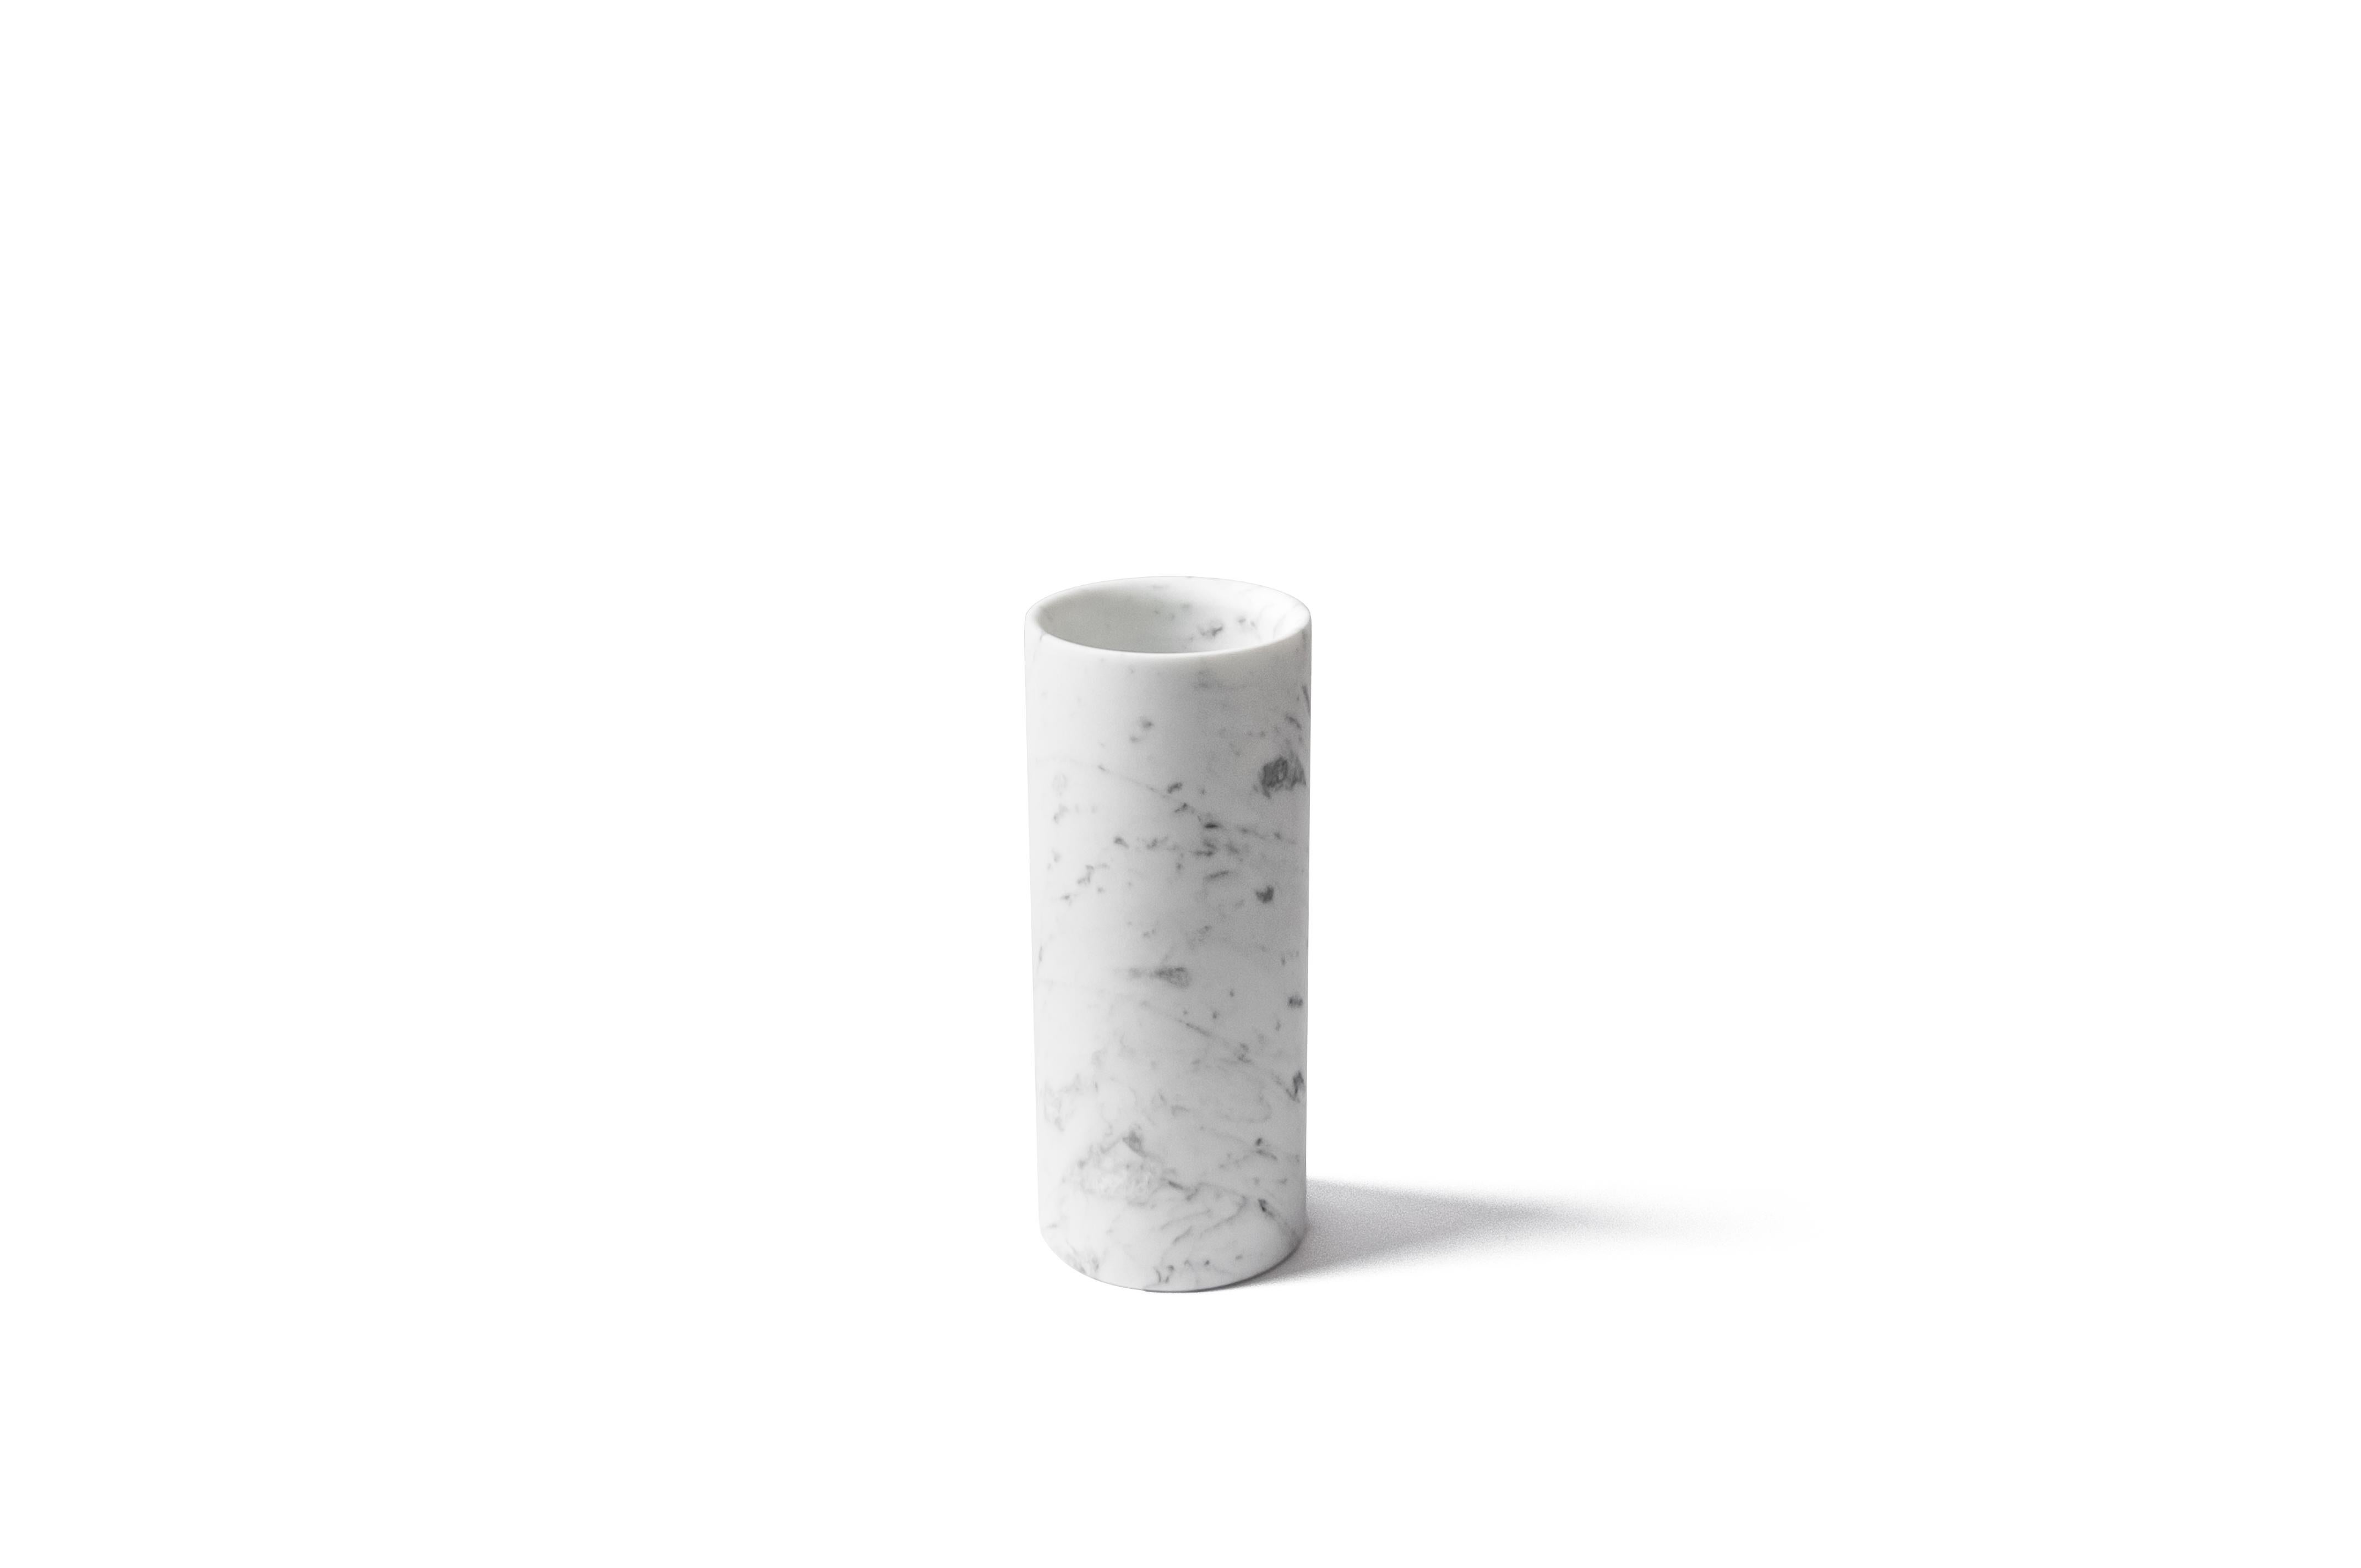 Cylindrical satin white Carrara marble vase made in Italy, Carrara.
Each piece is in a way unique (since each marble block is different in veins and shades) and handcrafted in Italy. Slight variations in shape, color and size are to be considered a